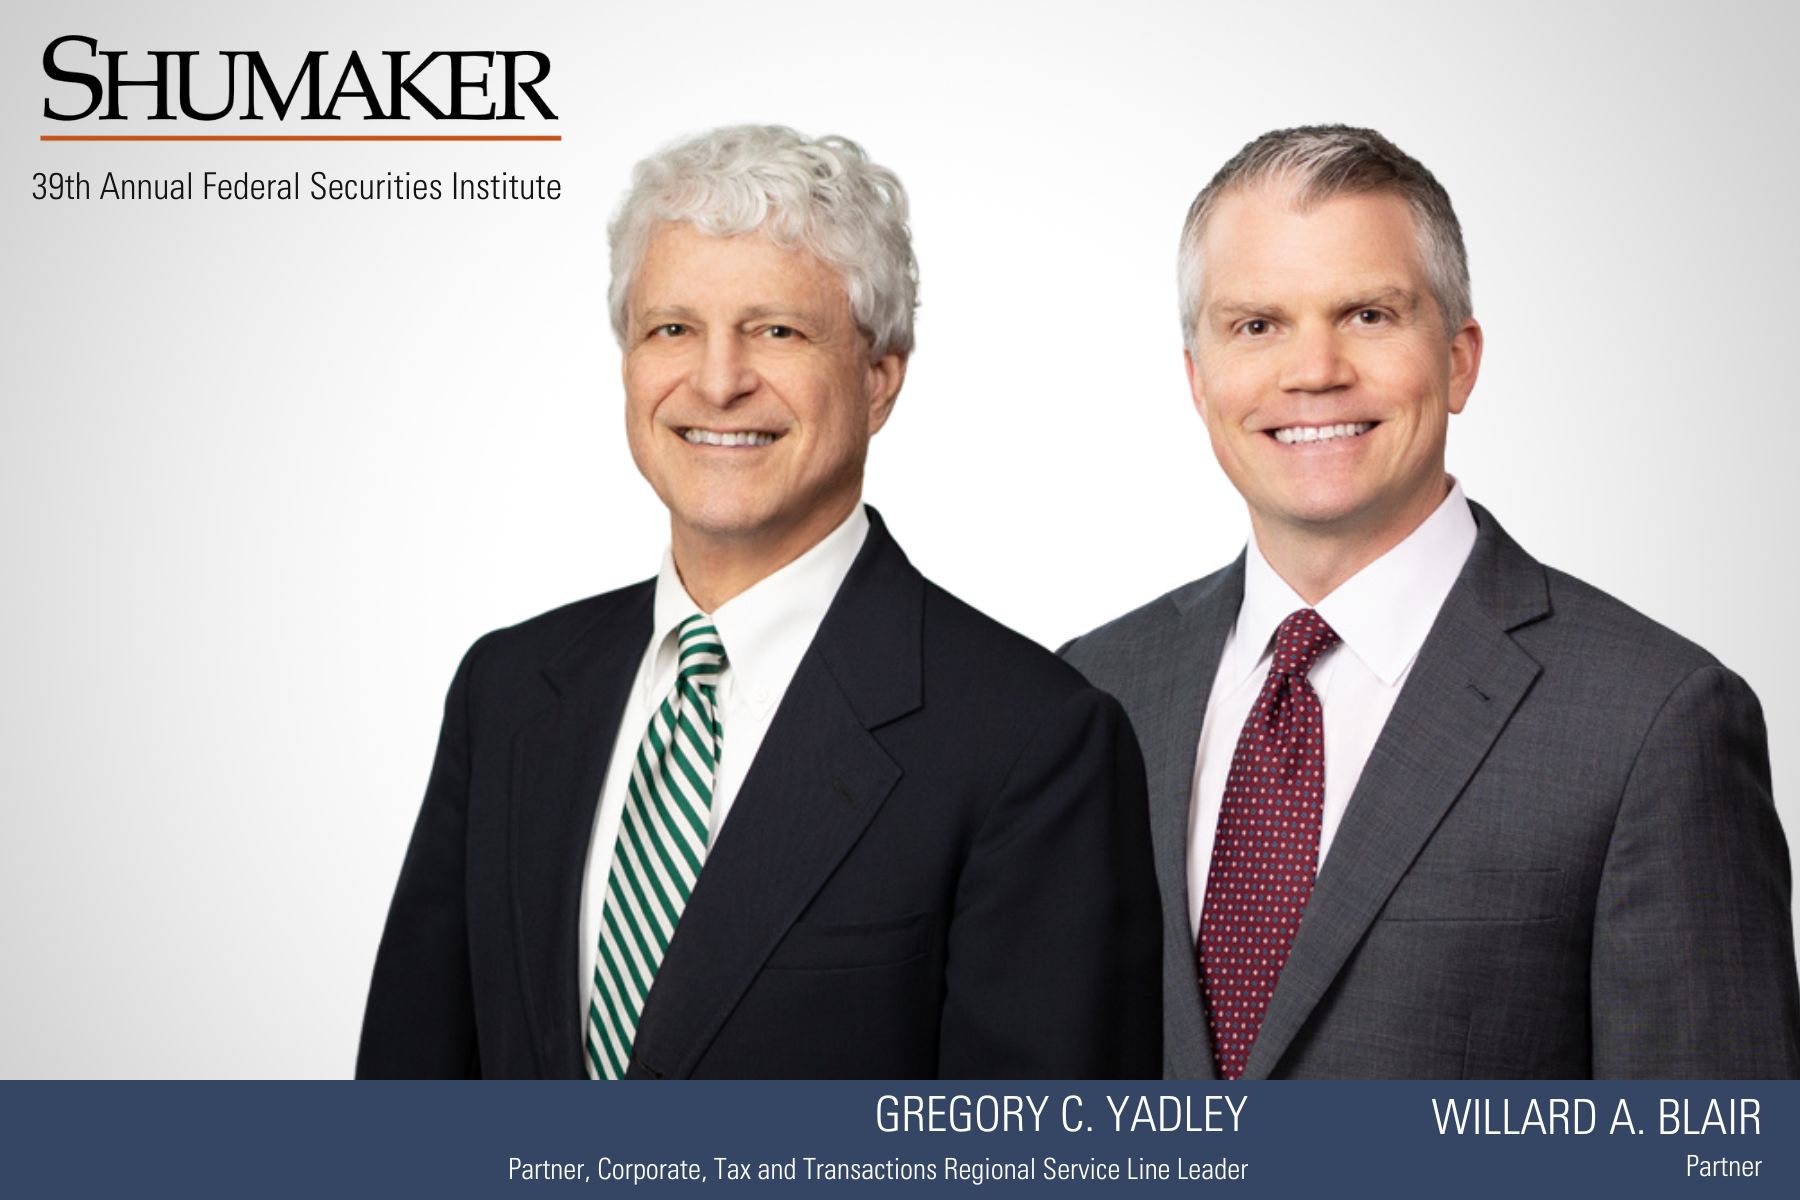 Tampa Partners Greg Yadley and Will Blair Active in the 39th Annual Federal Securities Institute